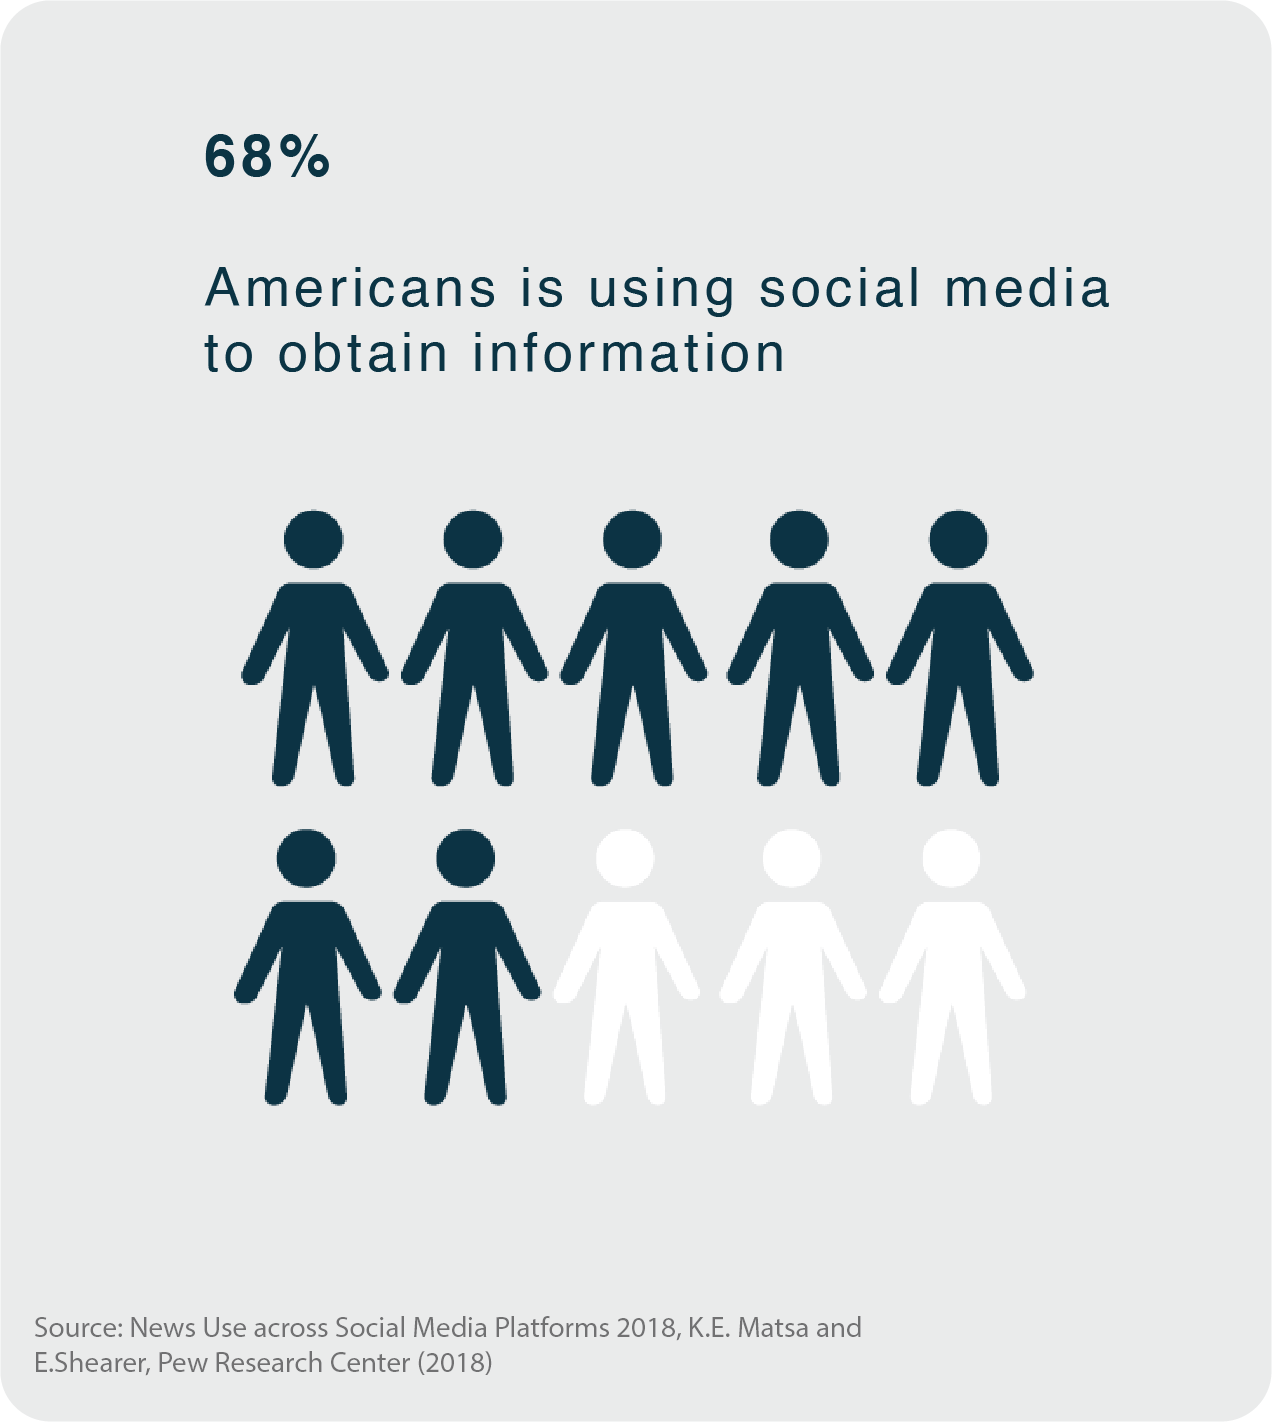 Graphic showing 68% of Americans use social media to obtain information